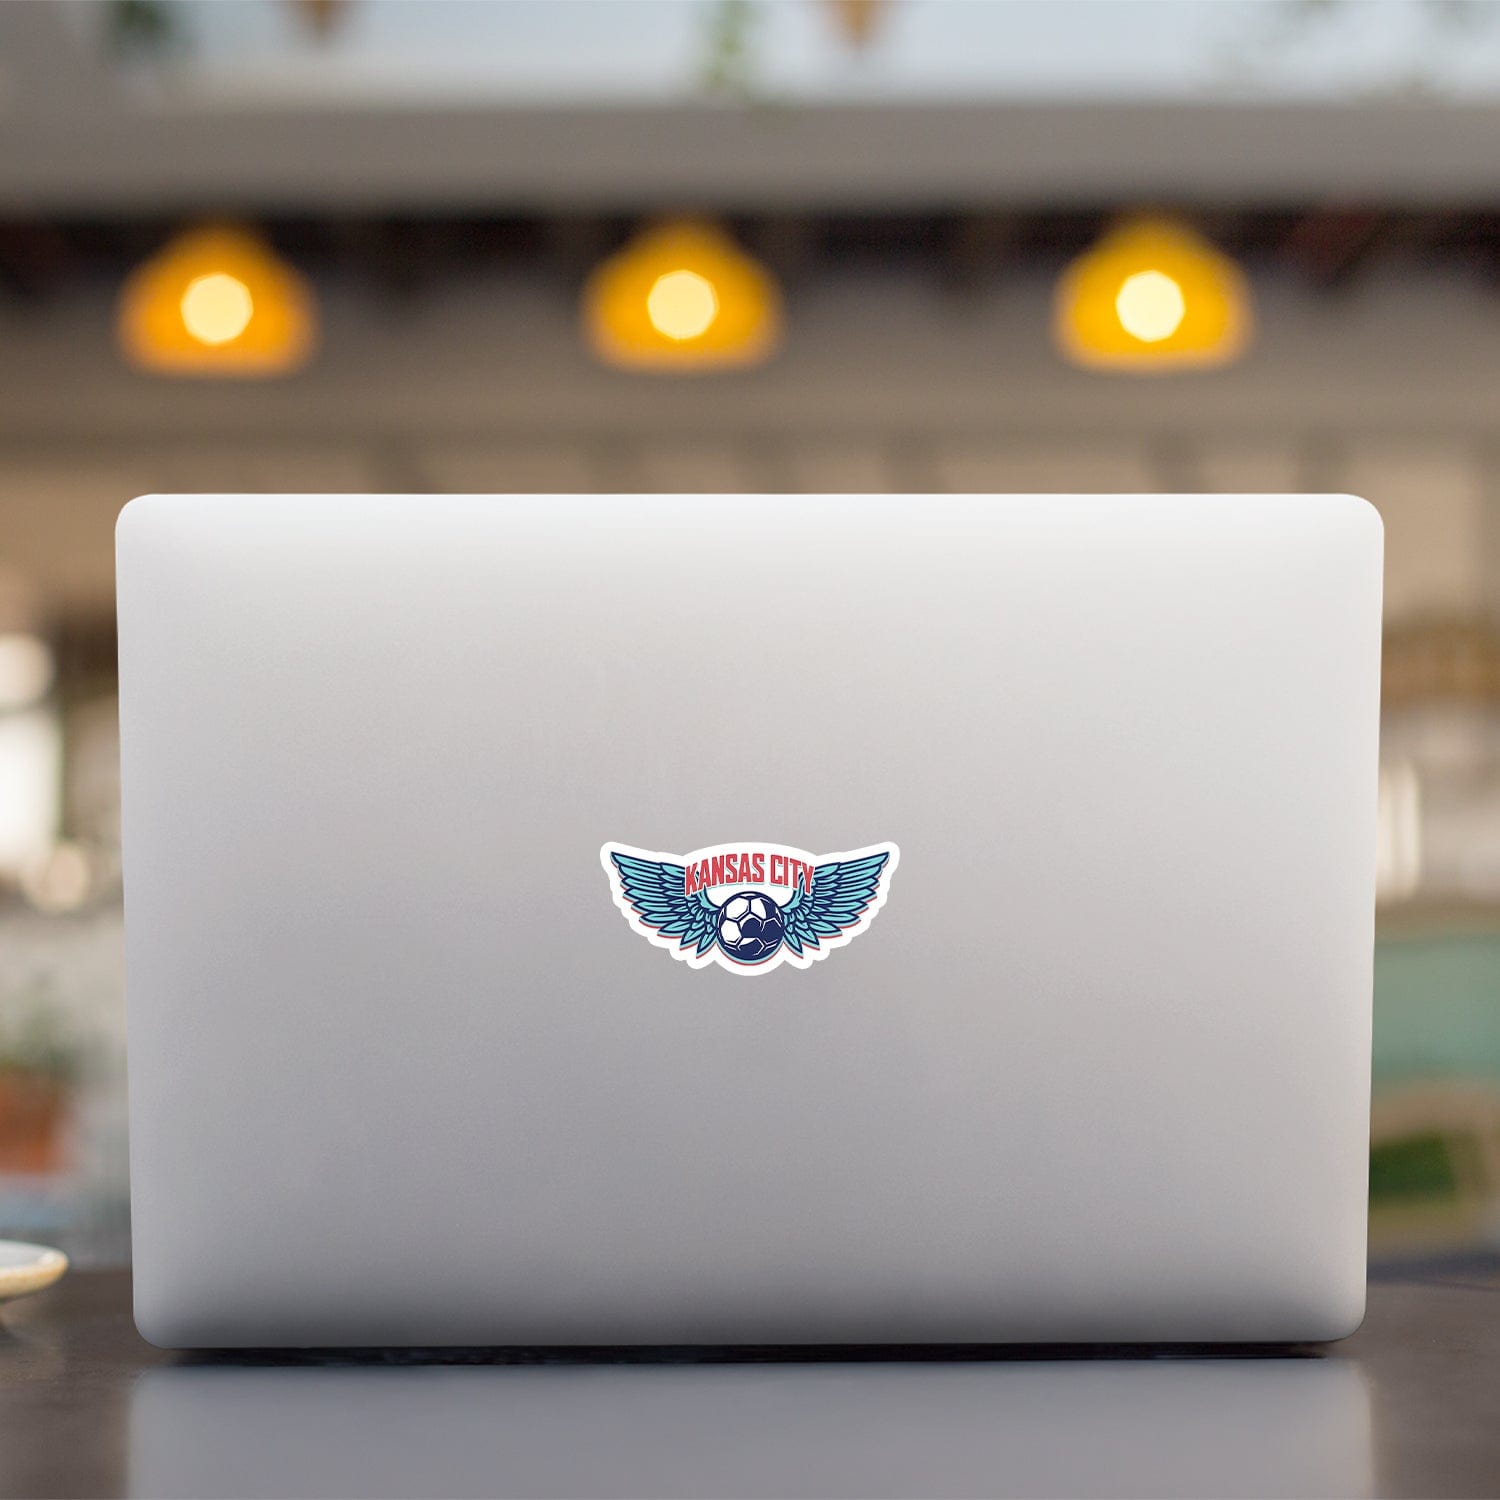 KC Swag Kansas City Current KC WING BALL die-cut sticker decal made from waterproof vinyl on open laptop back